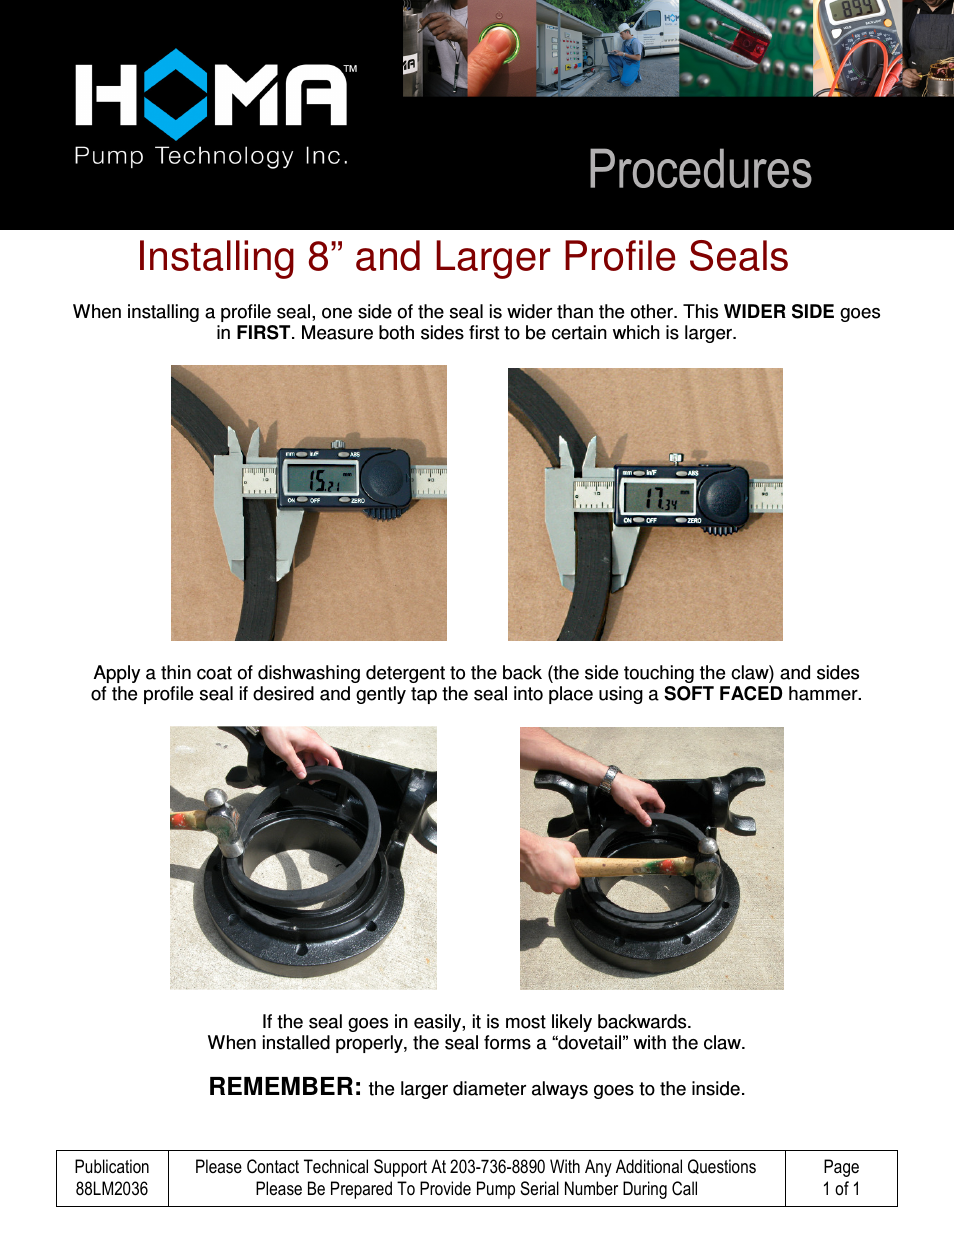 Installing 8 Inch and Larger Profile Seals